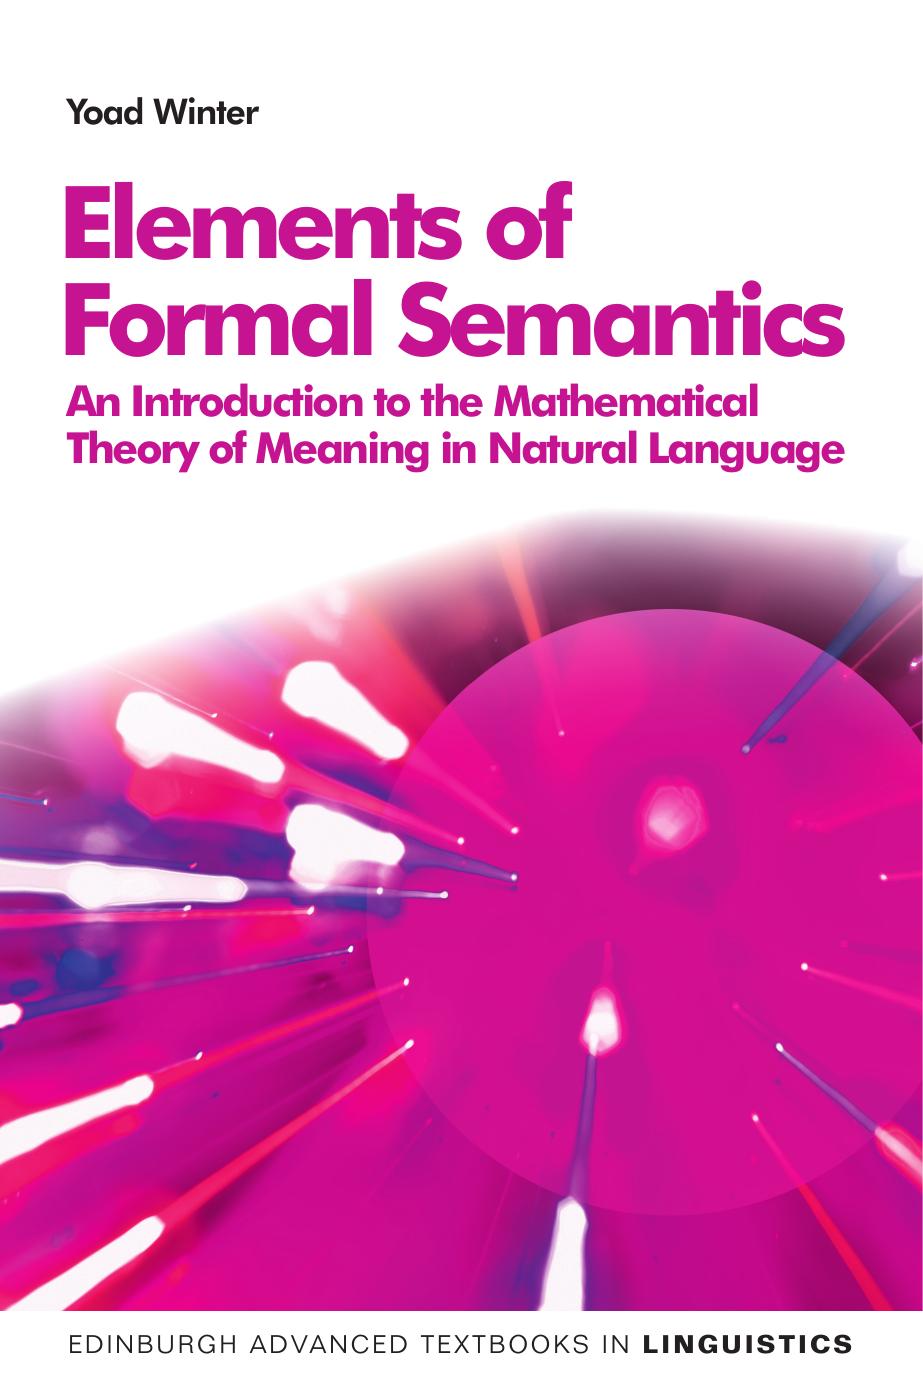 Elements of Formal Semantics: An Introduction to the Mathematical Theory of Meaning in Natural Language